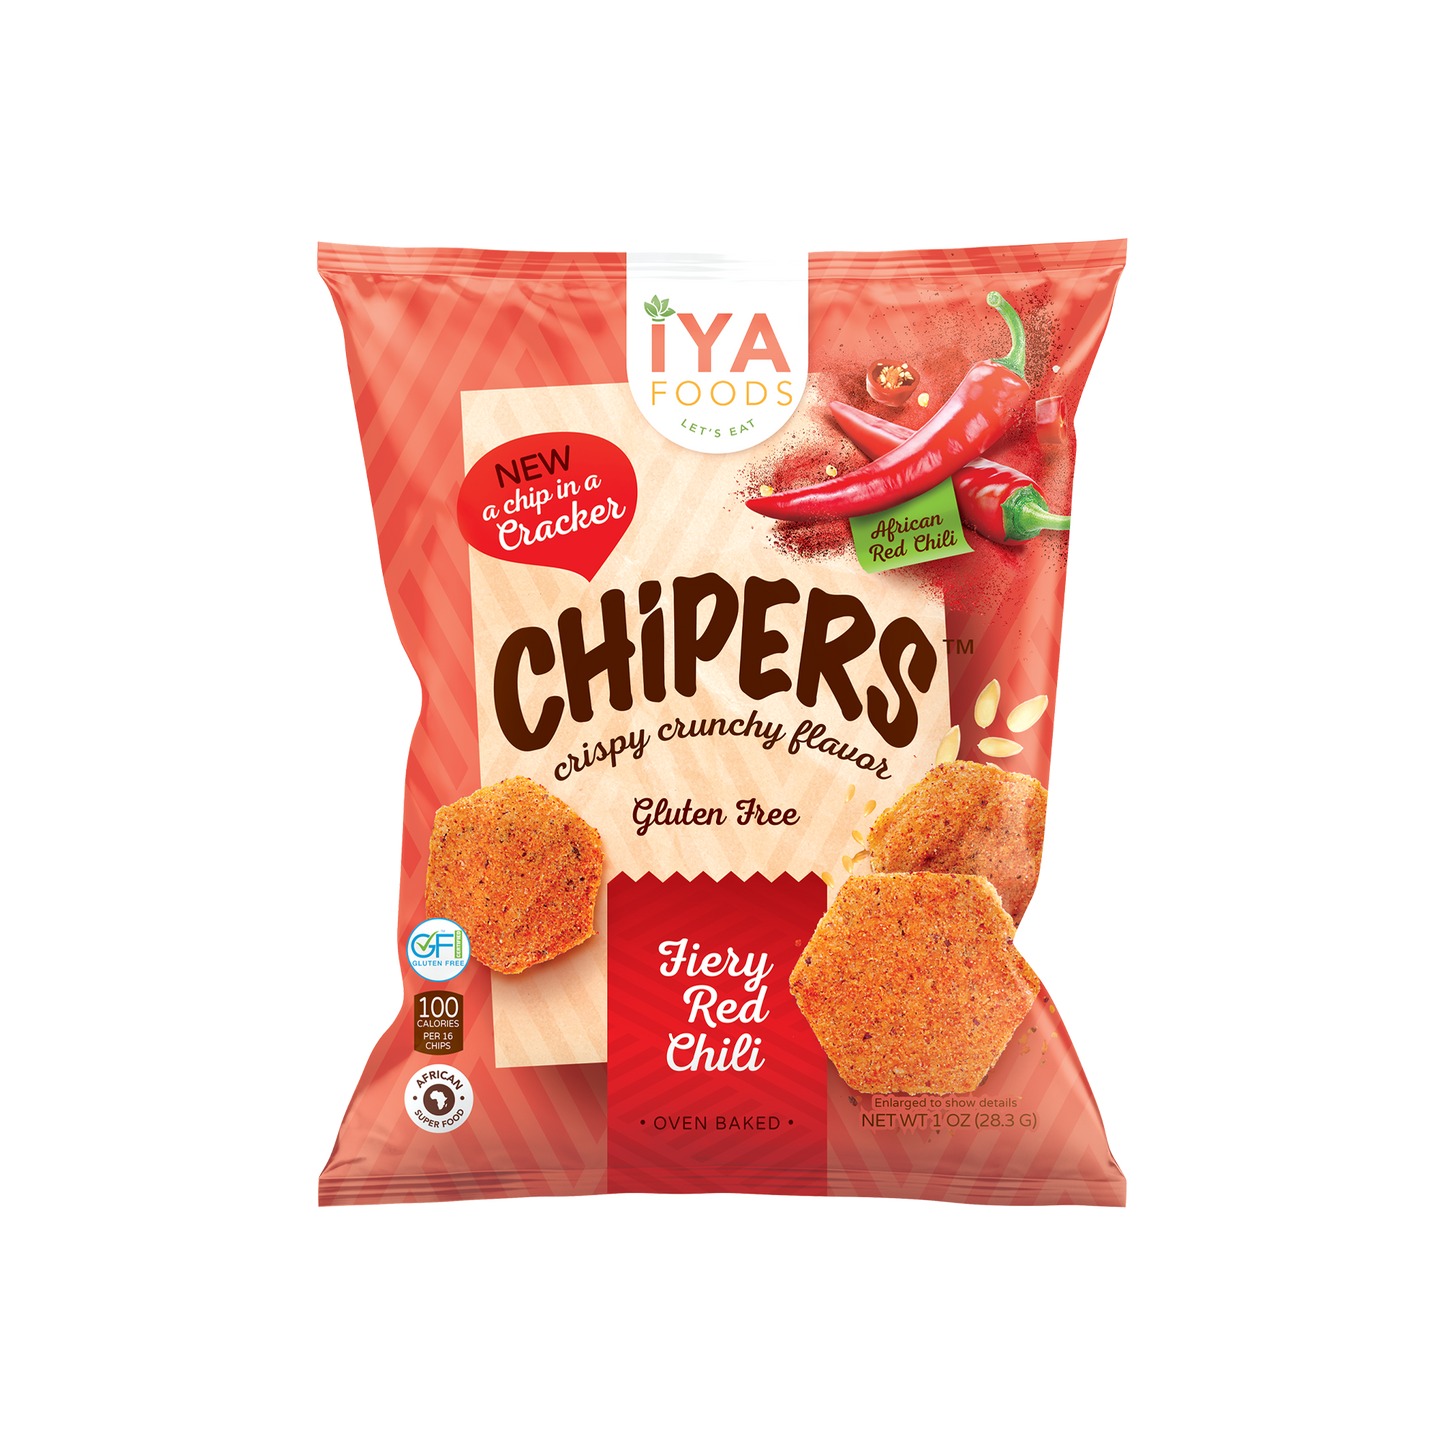 Fiery Red Chili Chipers - iyafoods